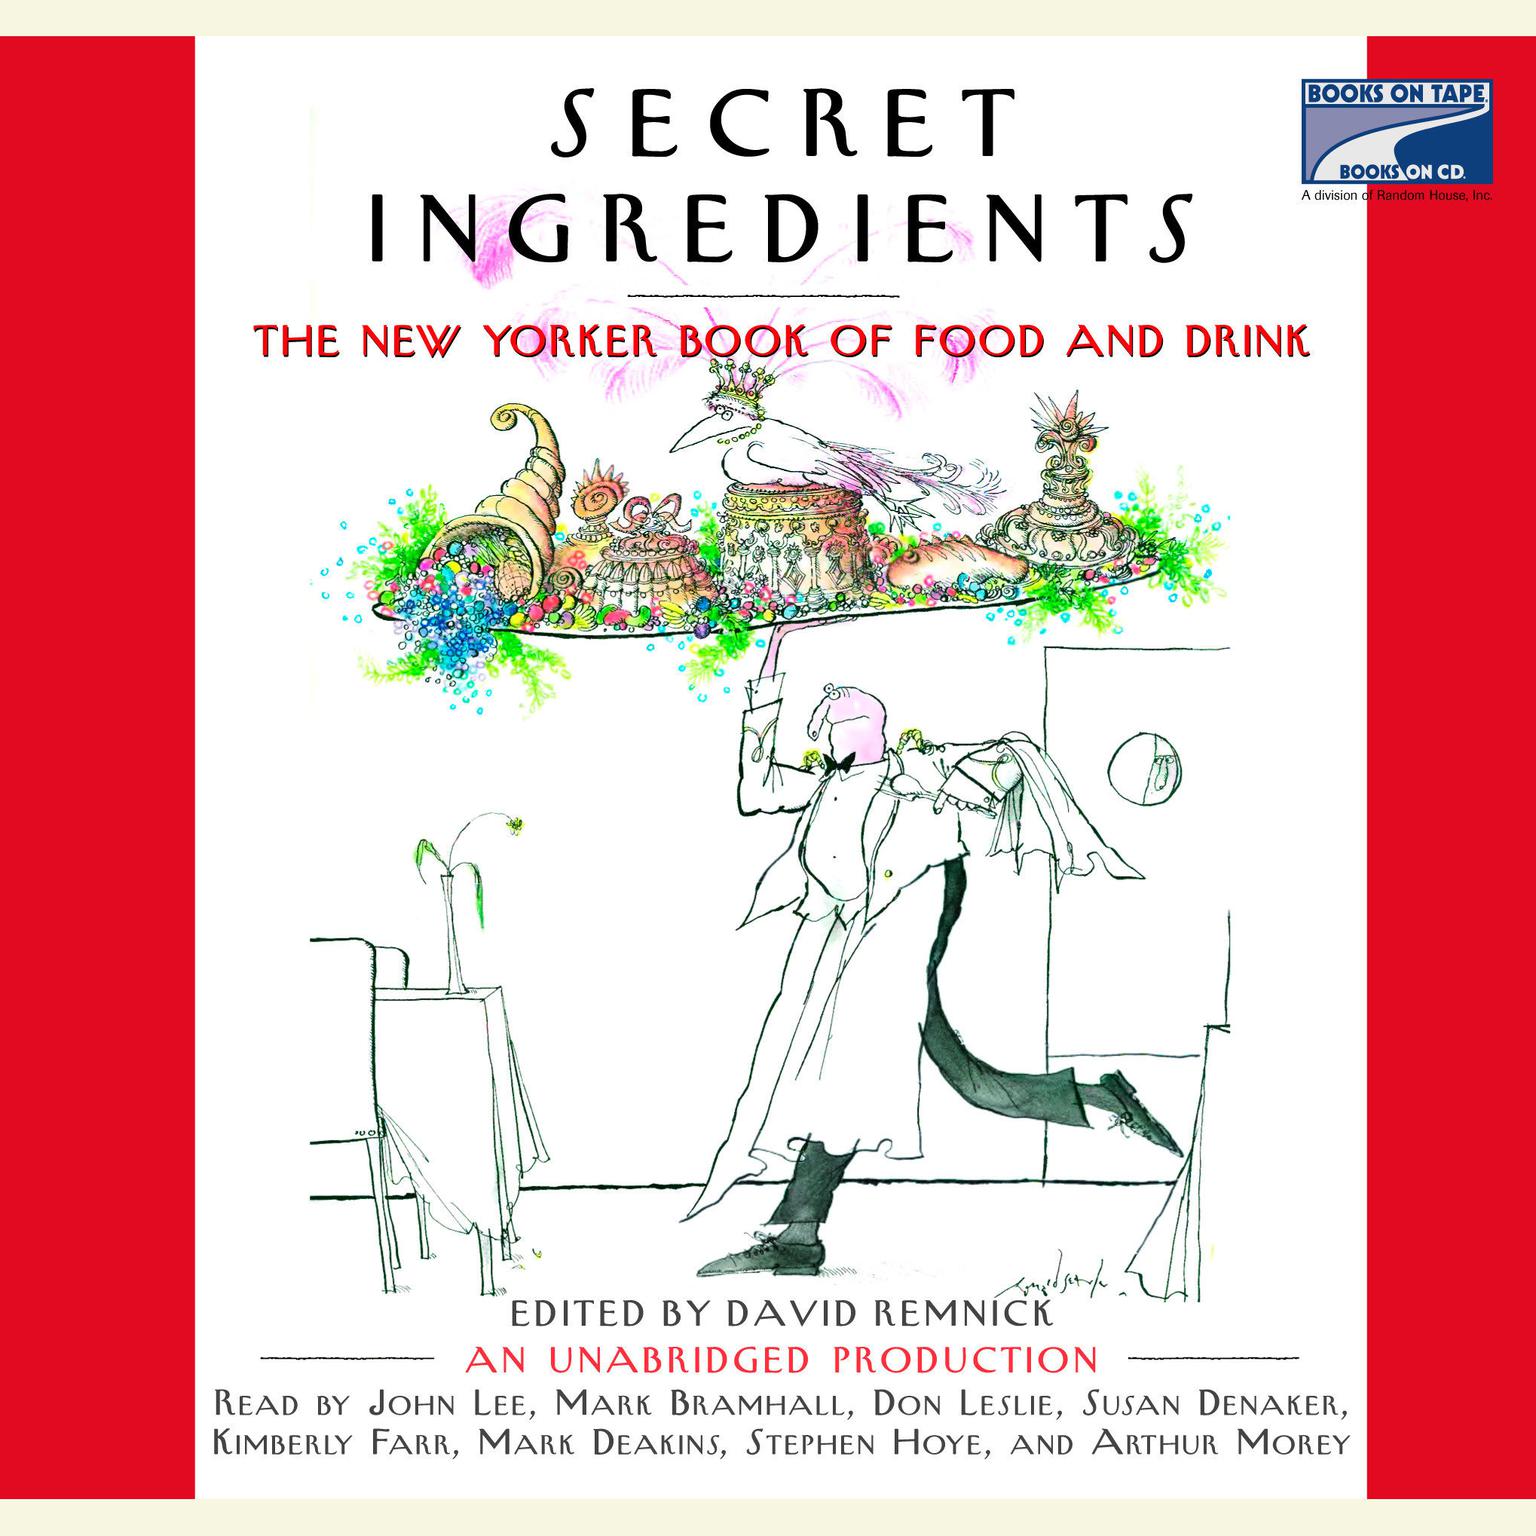 Secret Ingredients: The New Yorker Book of Food and Drink Audiobook, by David Remnick